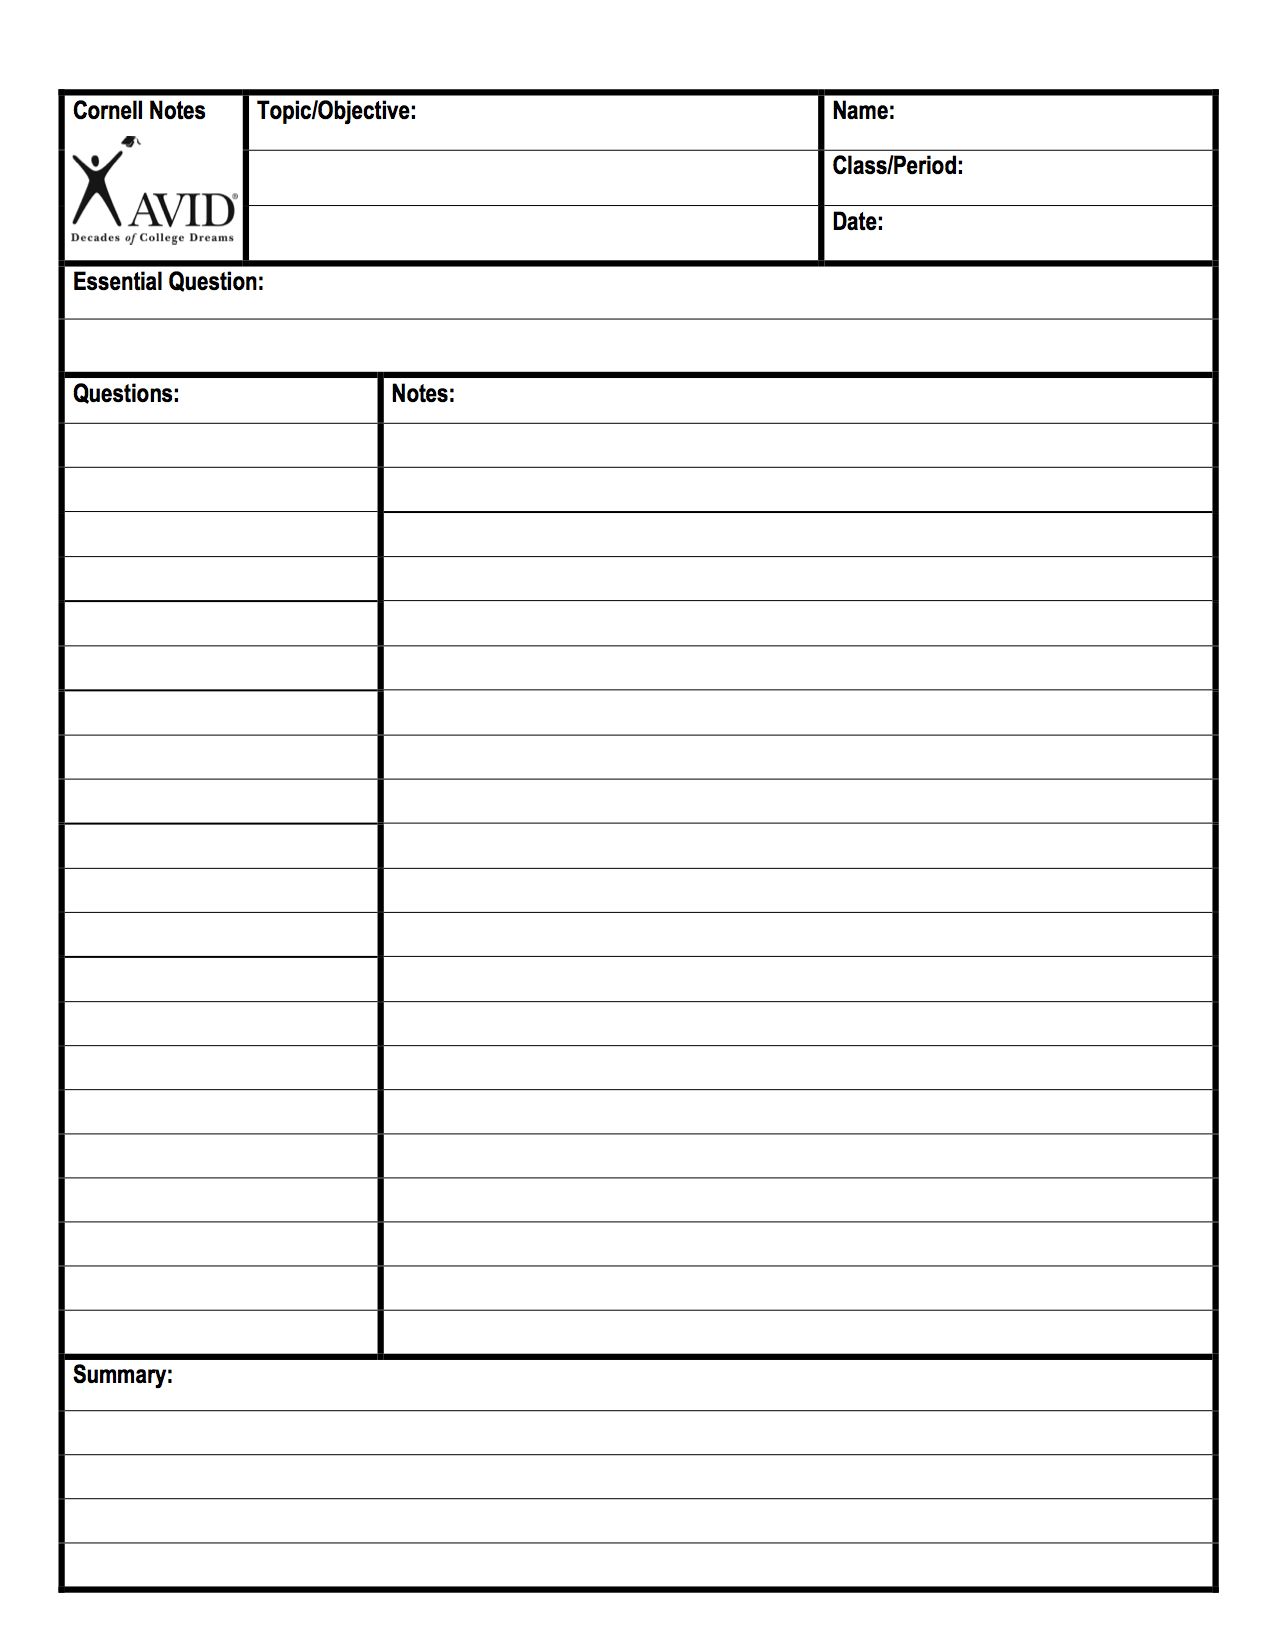 Cornell Notes Template from AVID (front) | Study tips | Pinterest 